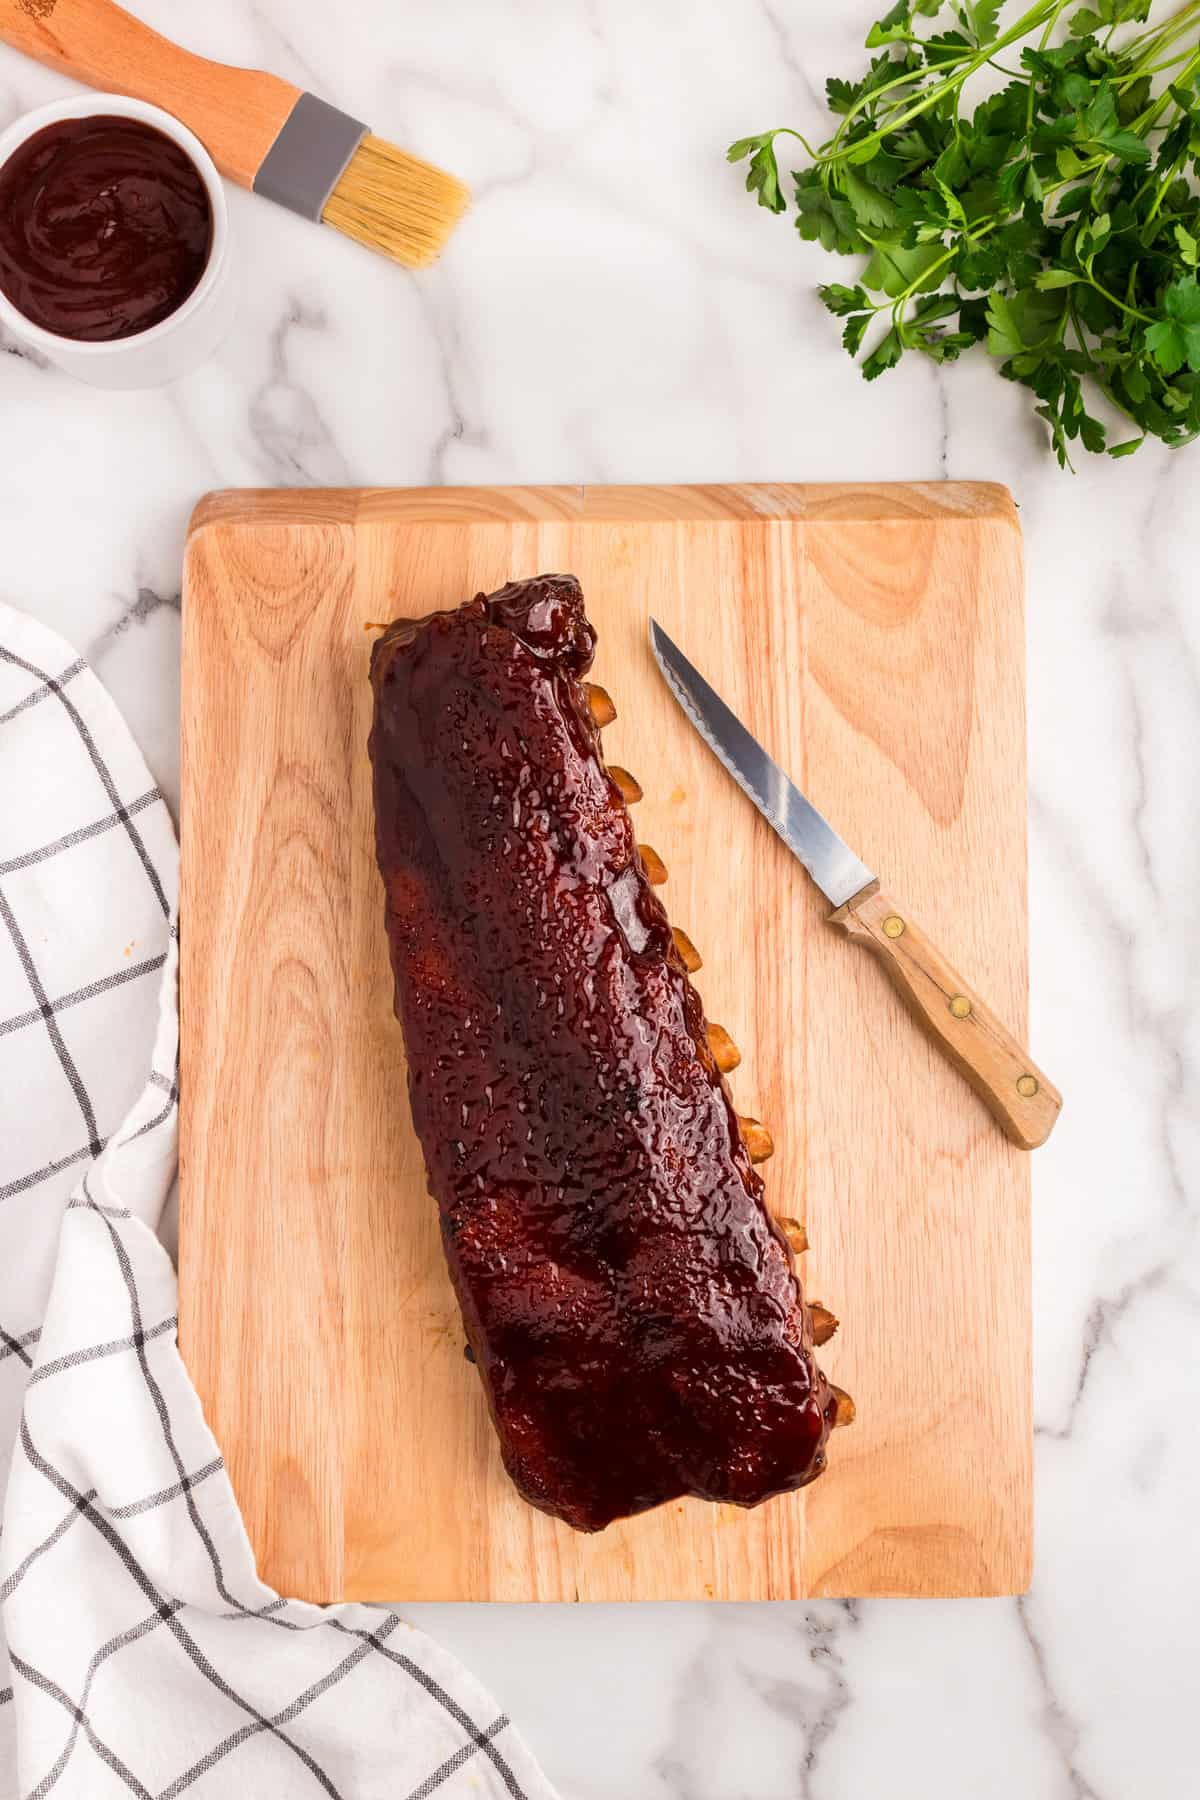 Oven Baked Ribs on wooden cutting board, ready to slice